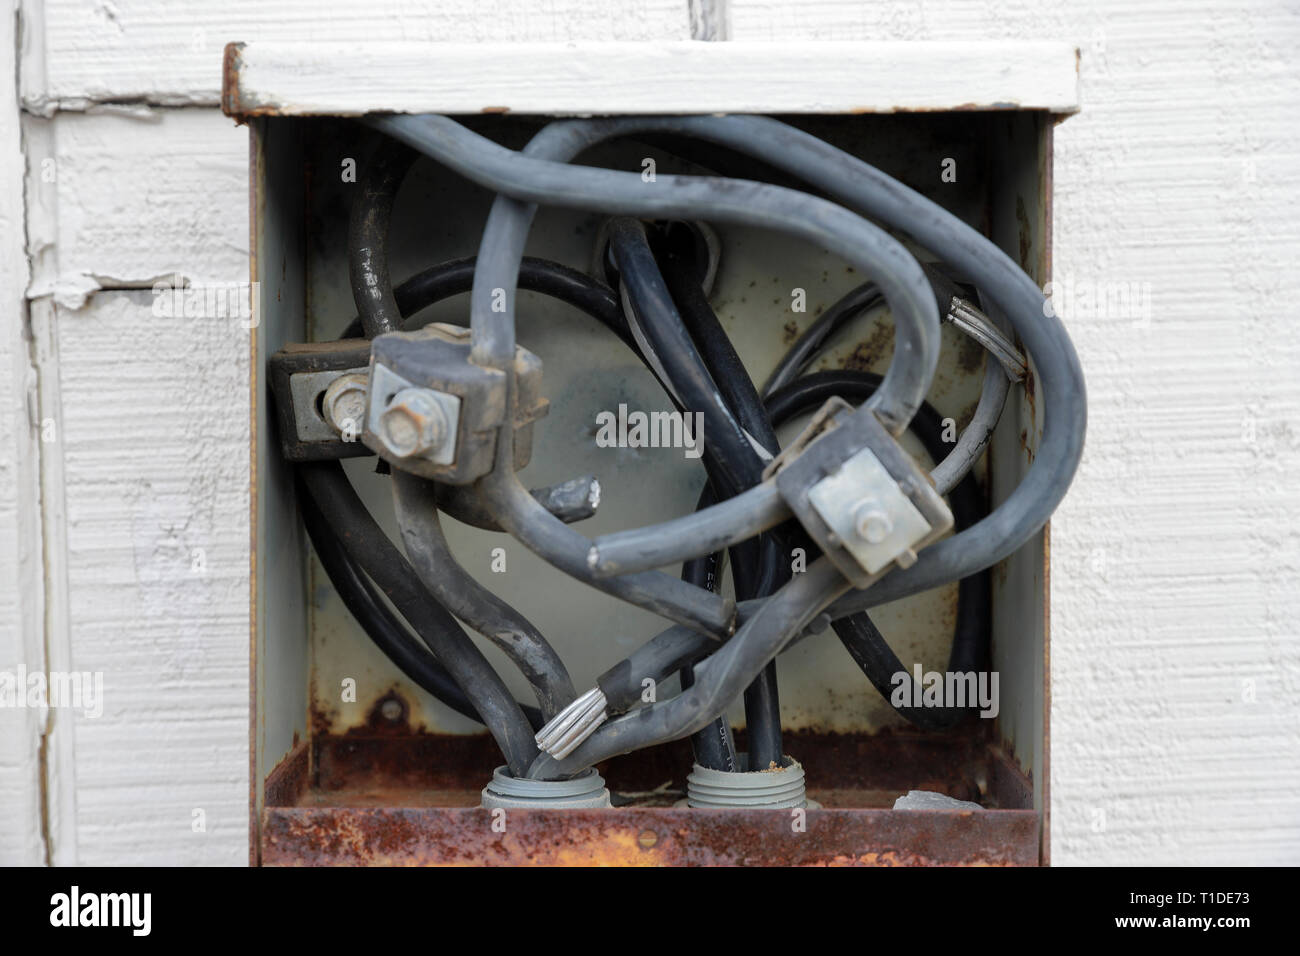 Old electrical connection panel or box on outside of building, wires exposed Stock Photo